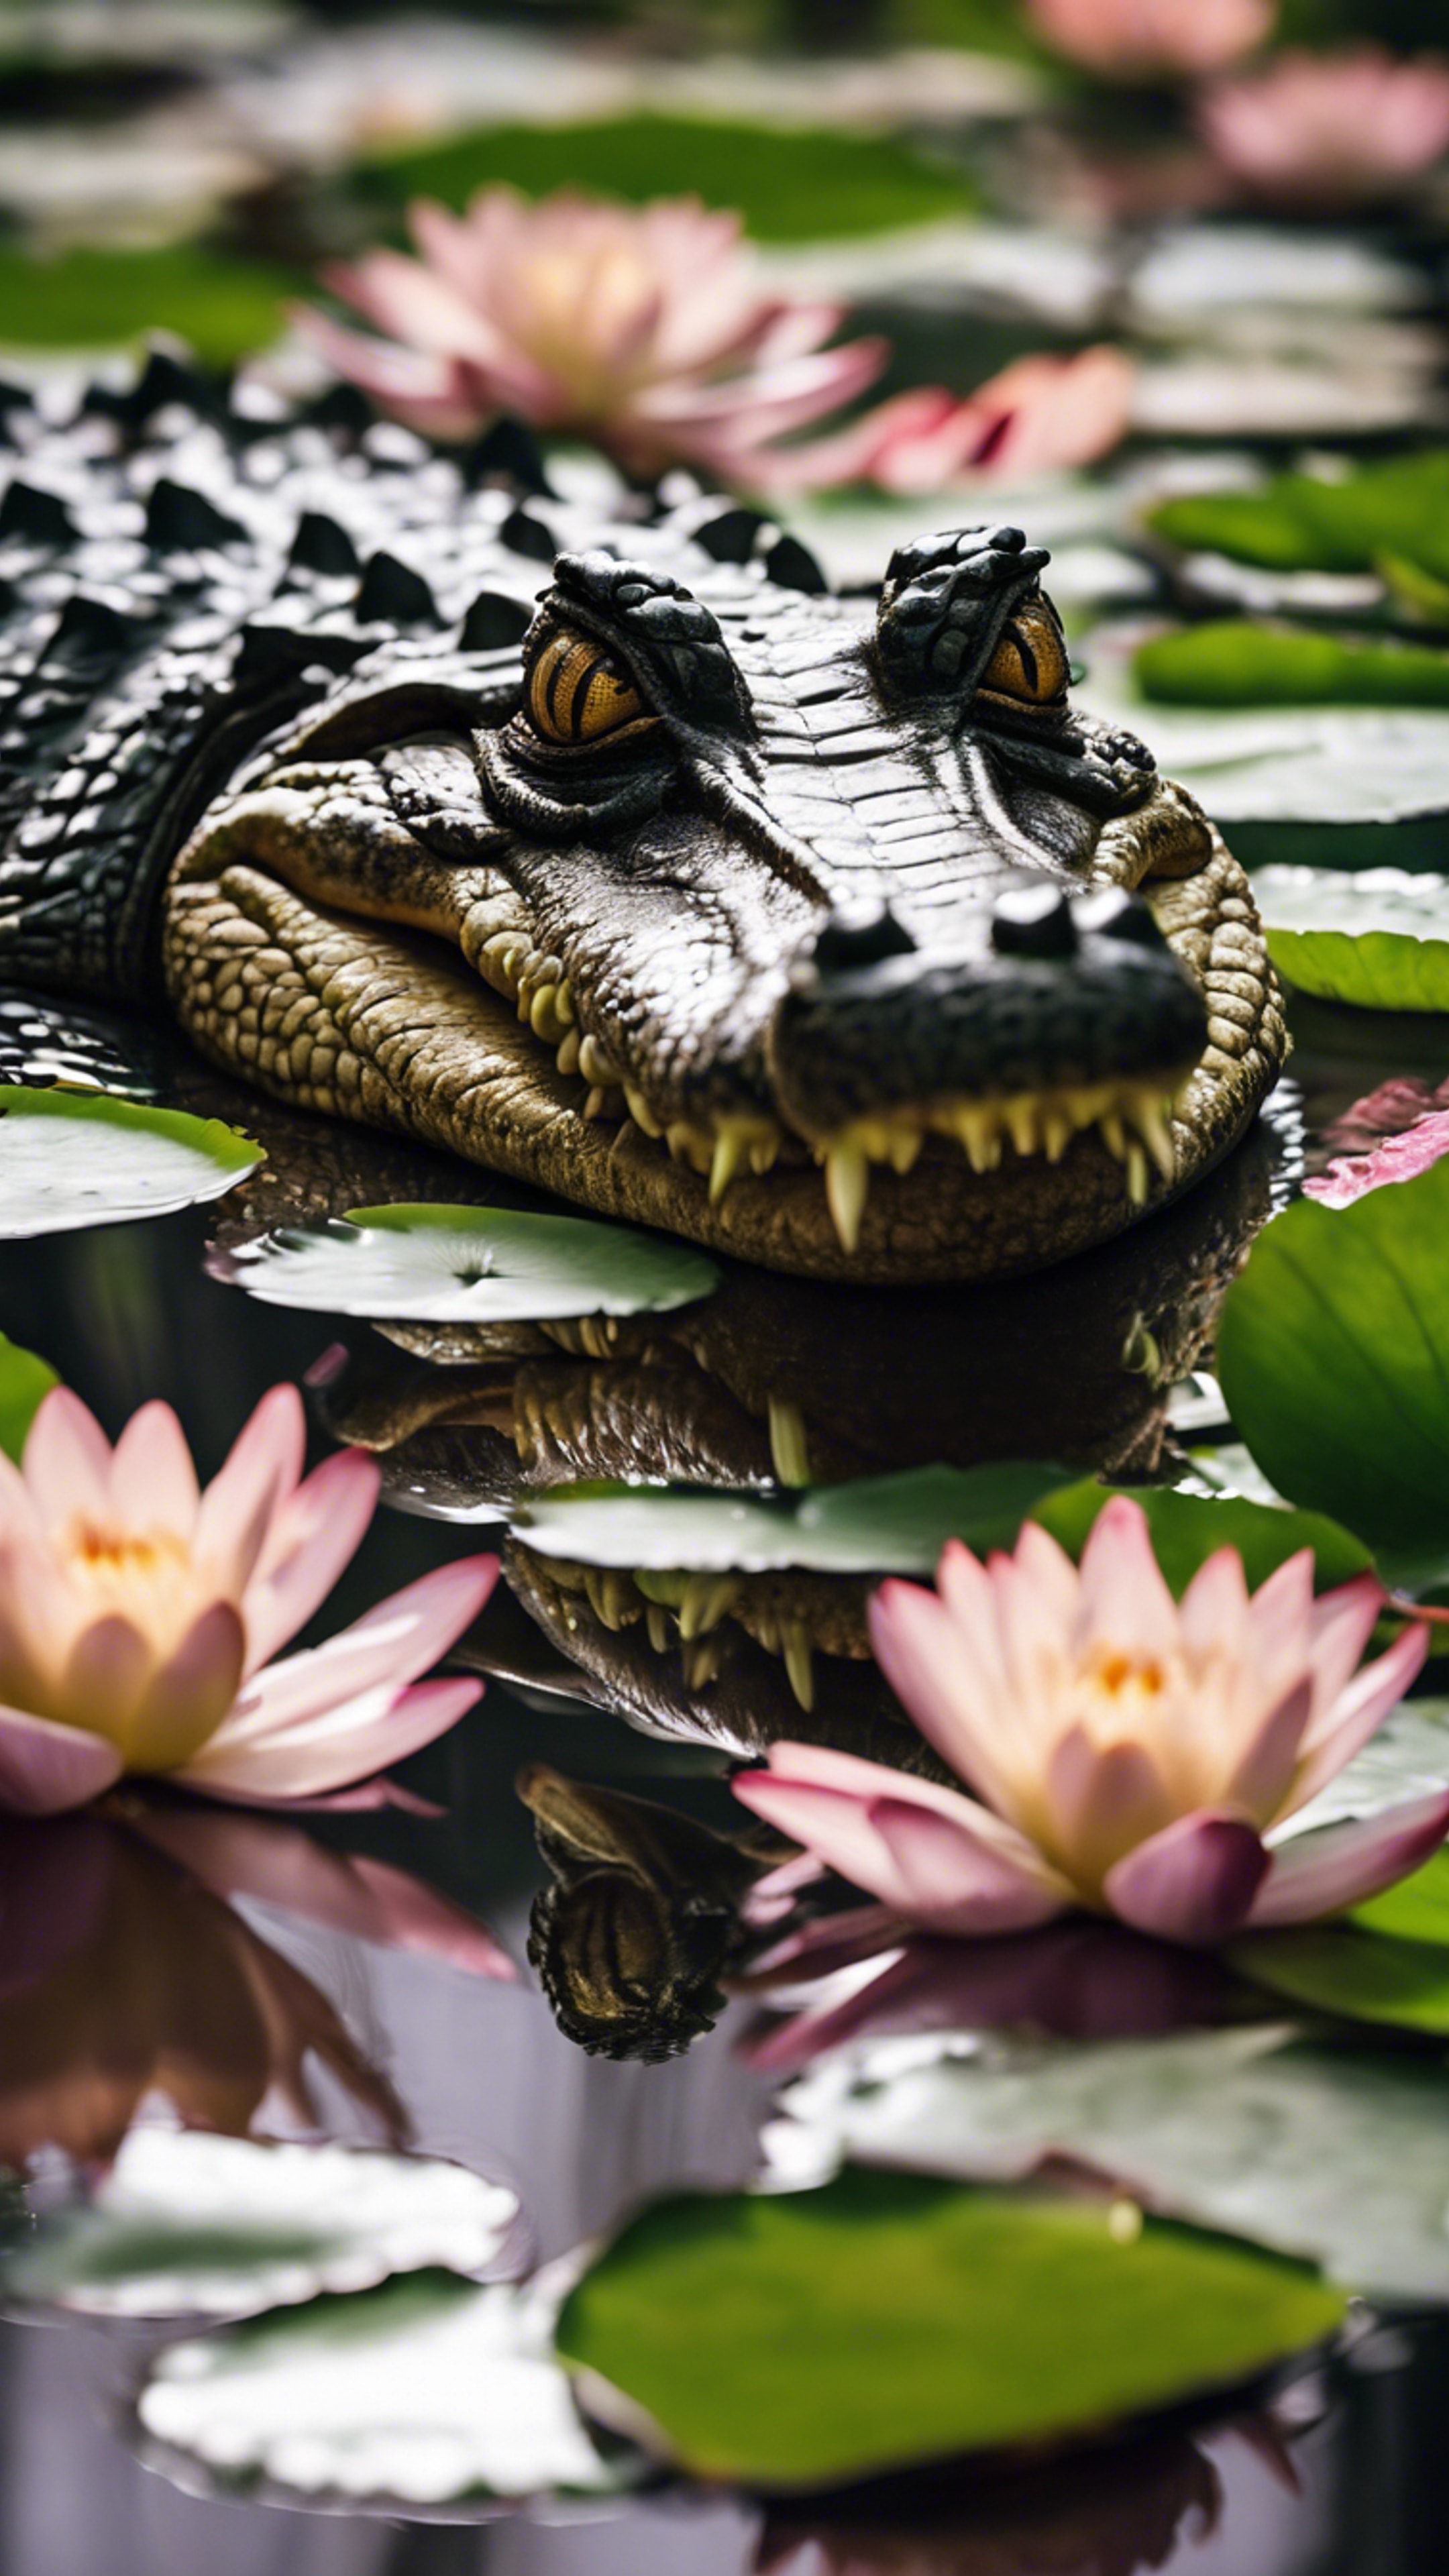 A crocodile lurking beneath a blanket of water lilies, waiting for the right moment. Wallpaper[035e2cfbc0d0411480ae]